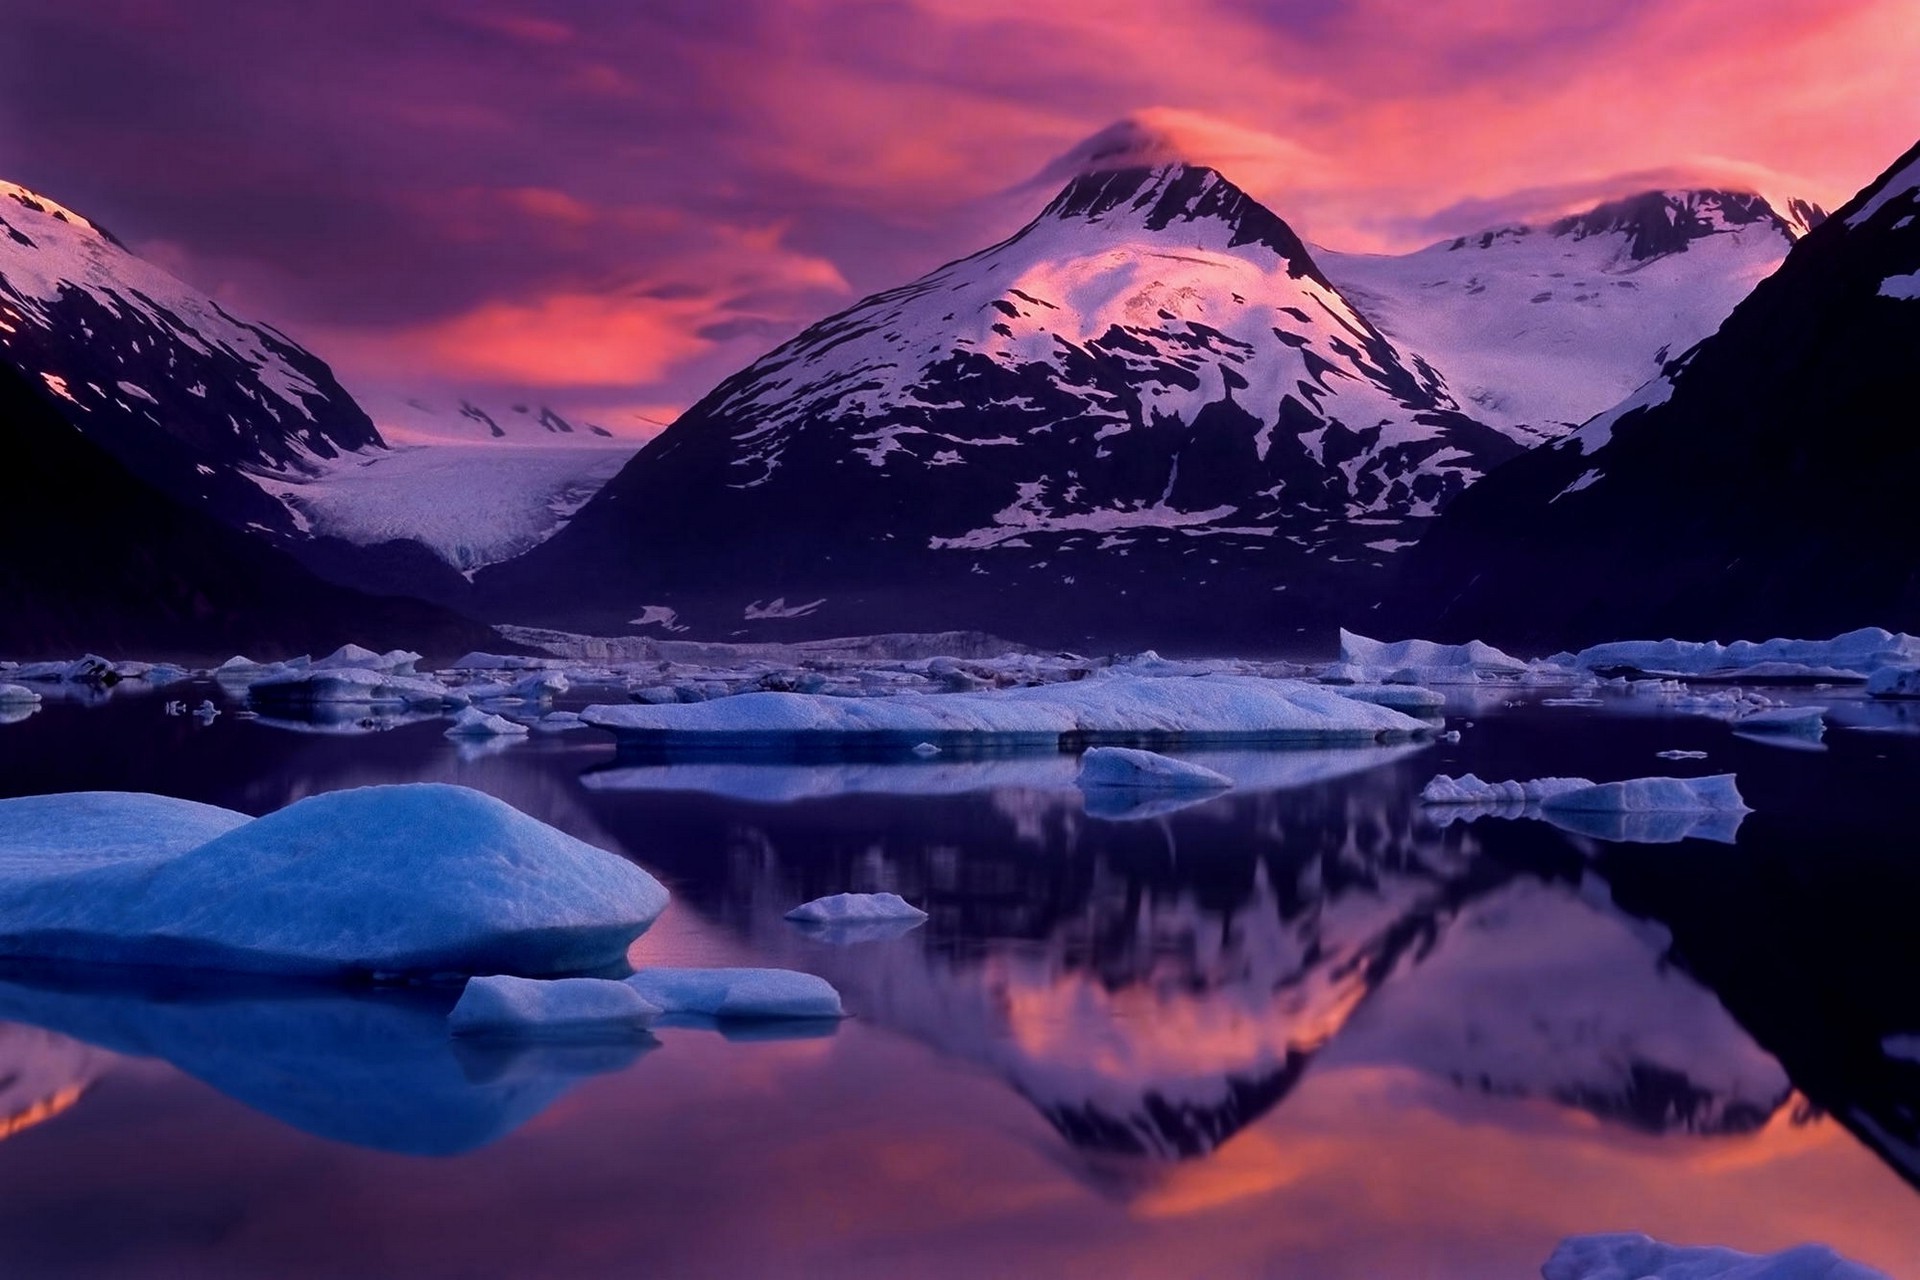 glaciers, Cold, Mountain, Sunset, Nature, Alaska, Snowy Peak, Reflection, Landscape, Sky, Ice, Water, Clouds, Winter Wallpaper